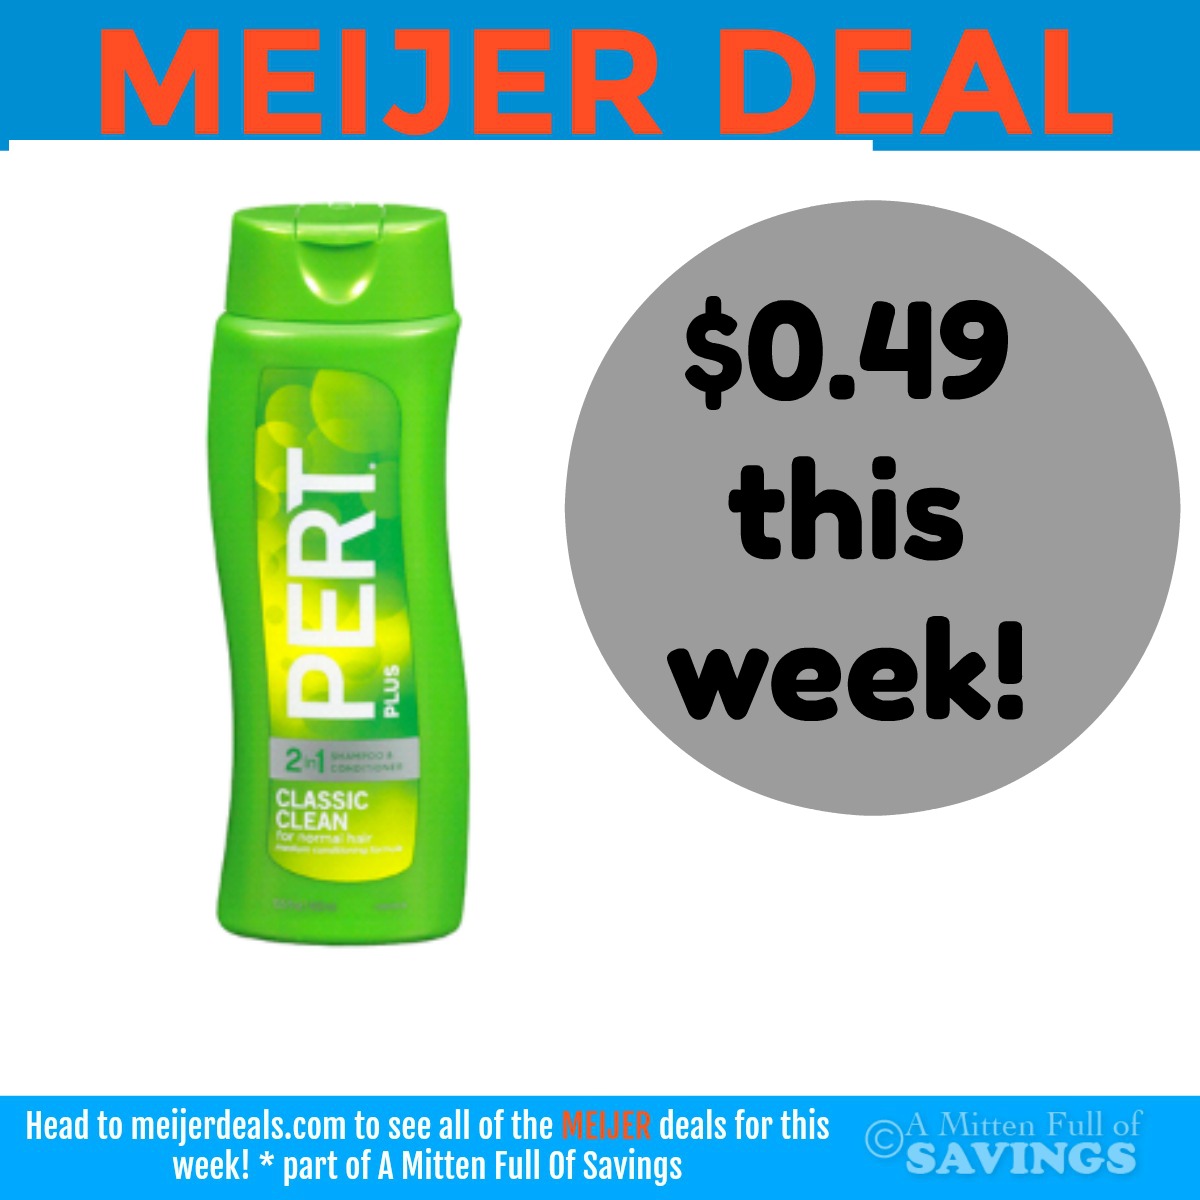 Meijer: Grab Pert Plus for only .49 cents this week